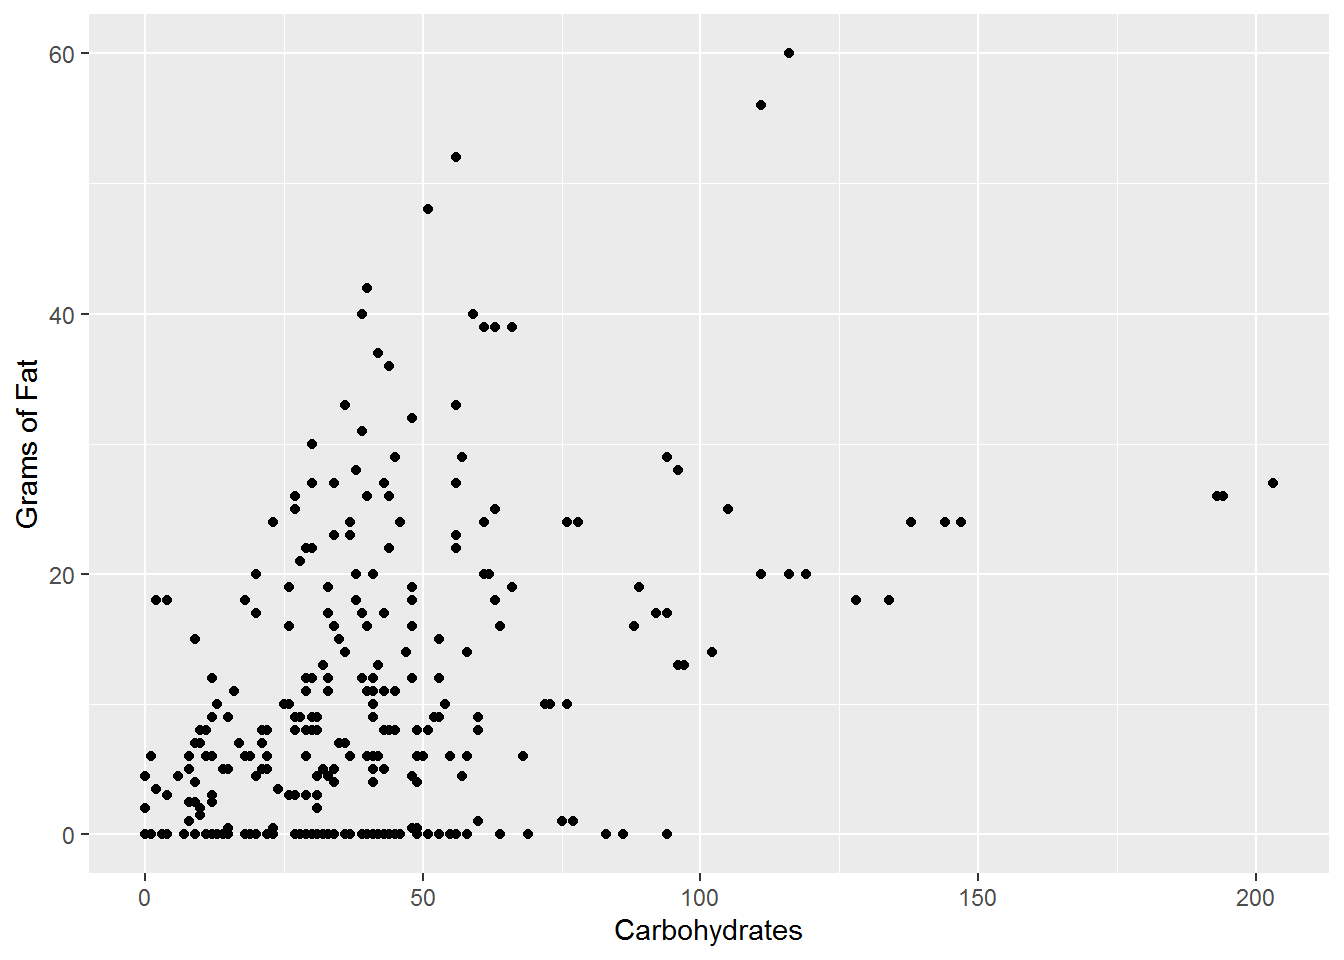 Carbohydrates and Grams of Fat (Pearson: 0.4422, Kendall: 0.2985)